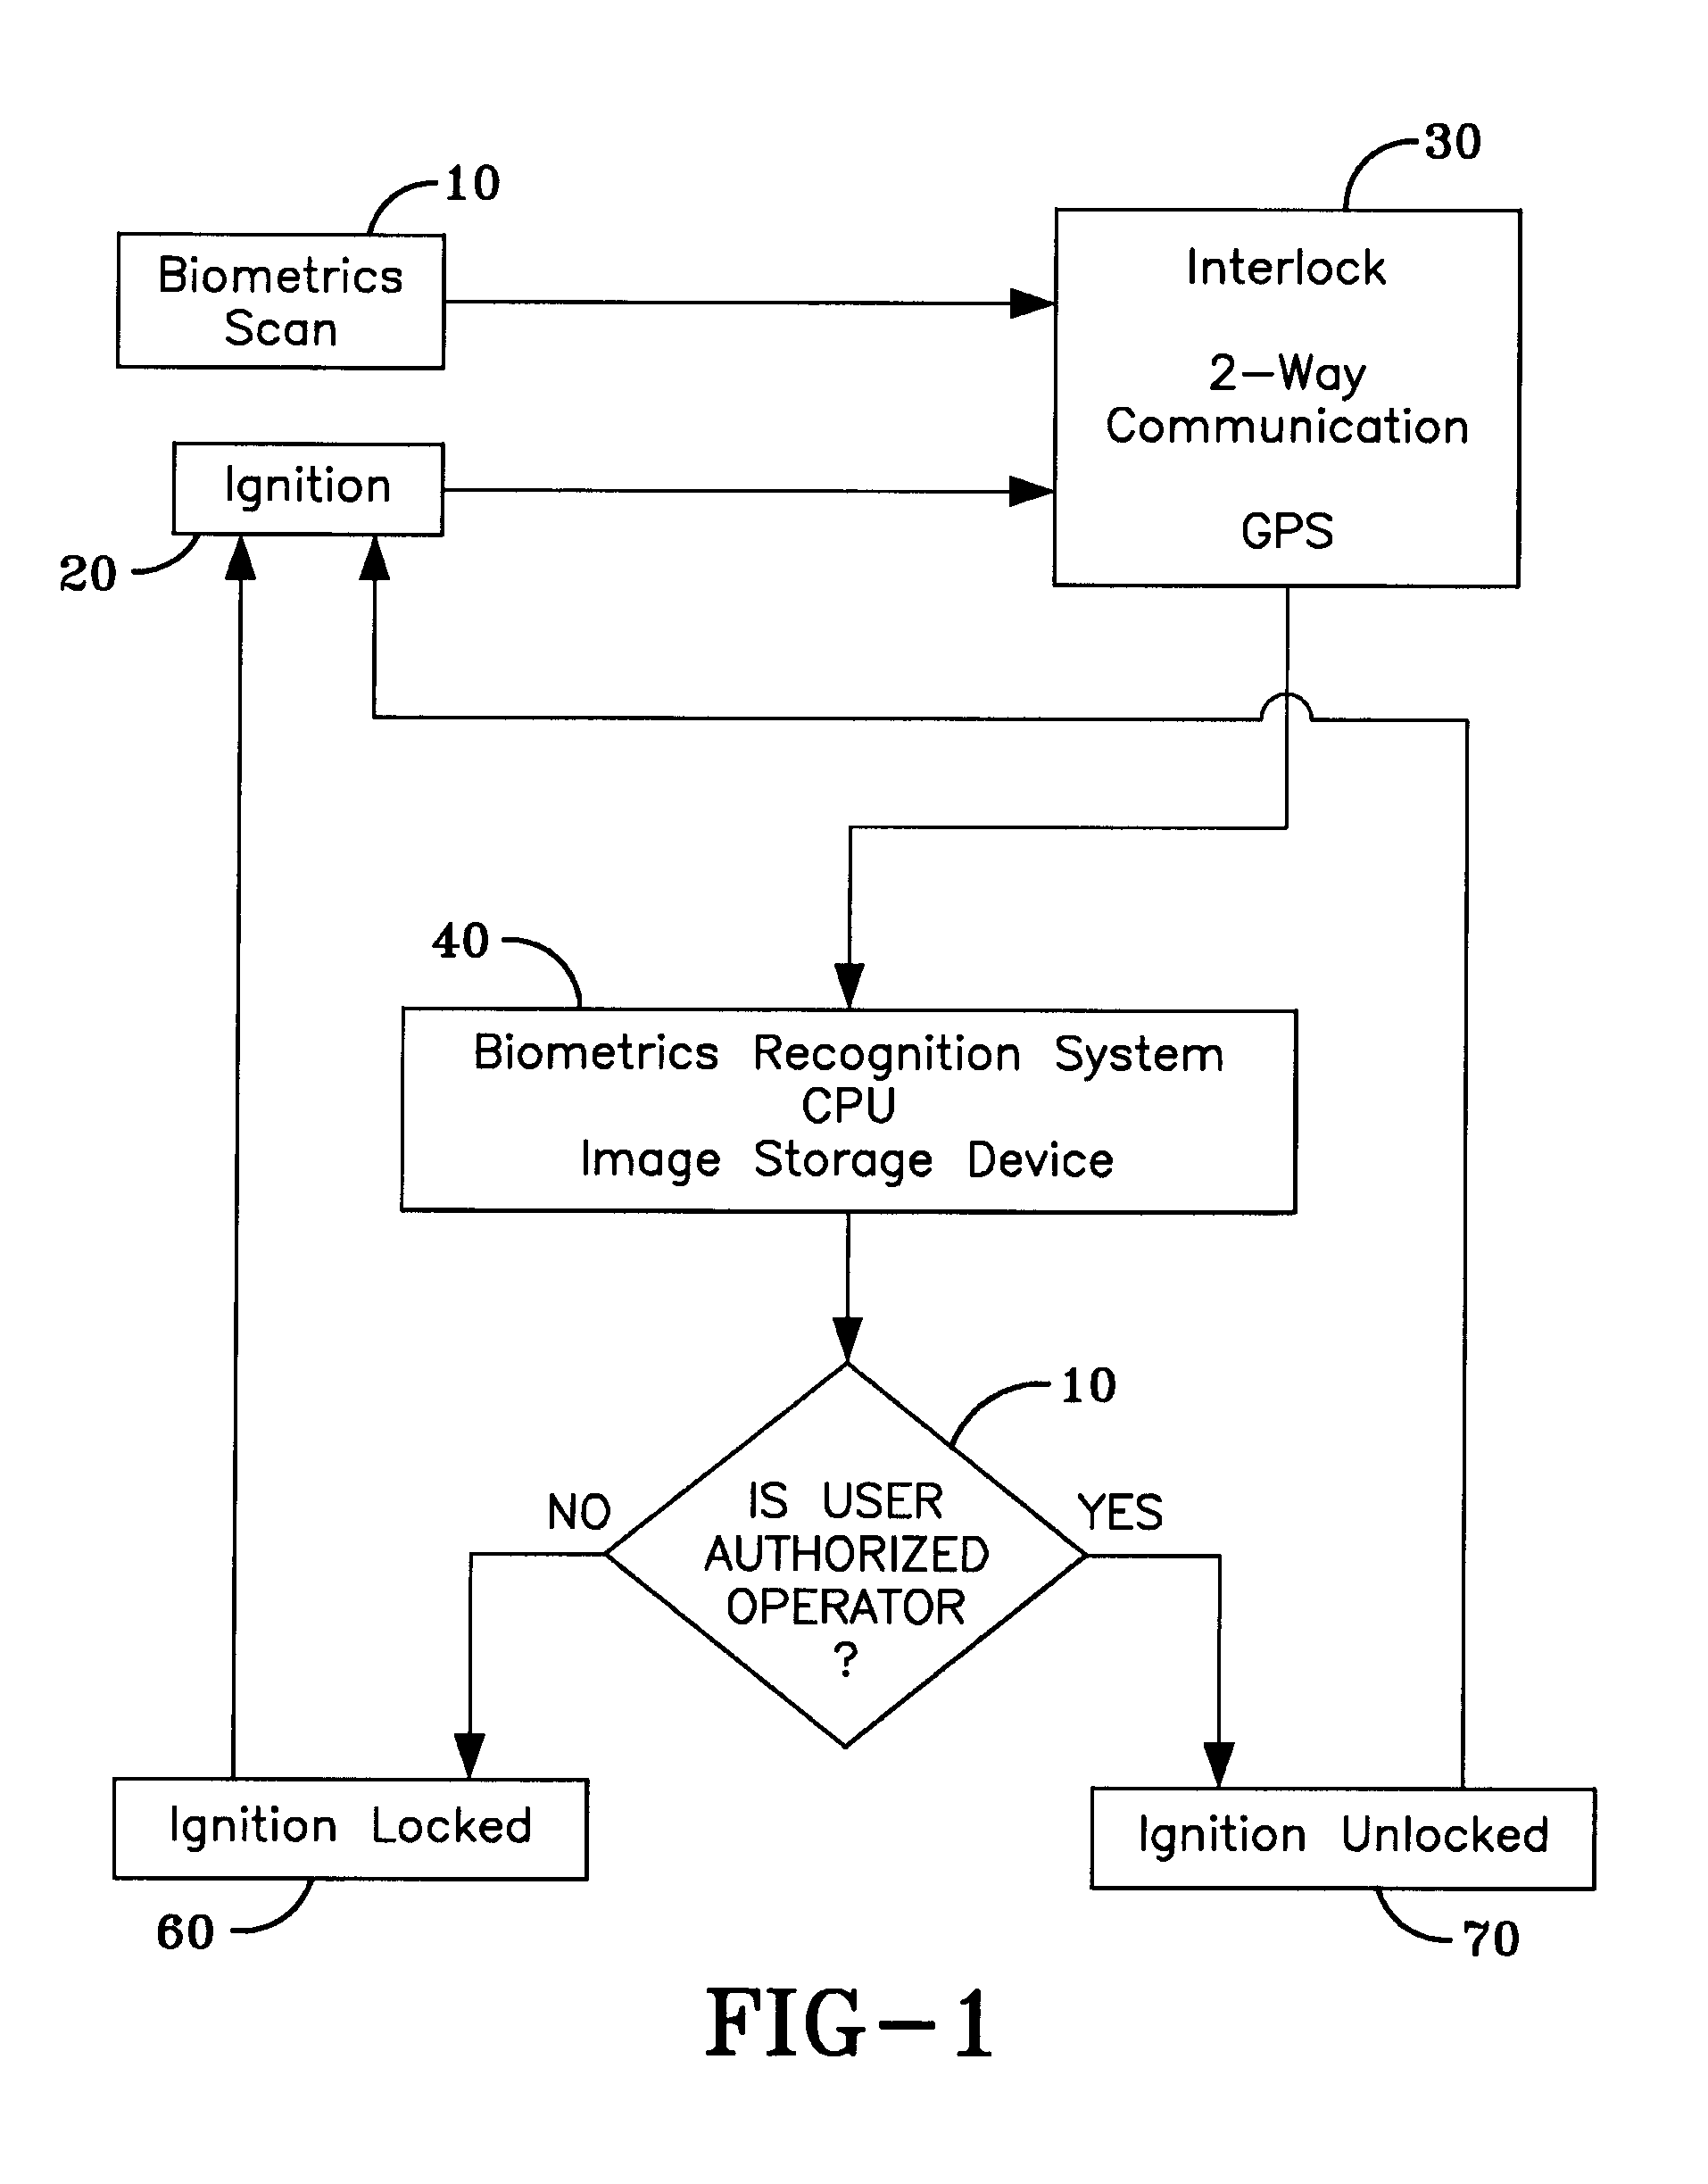 Breath alcohol ignition interlock device with biometric facial recognition with real-time verification of the user